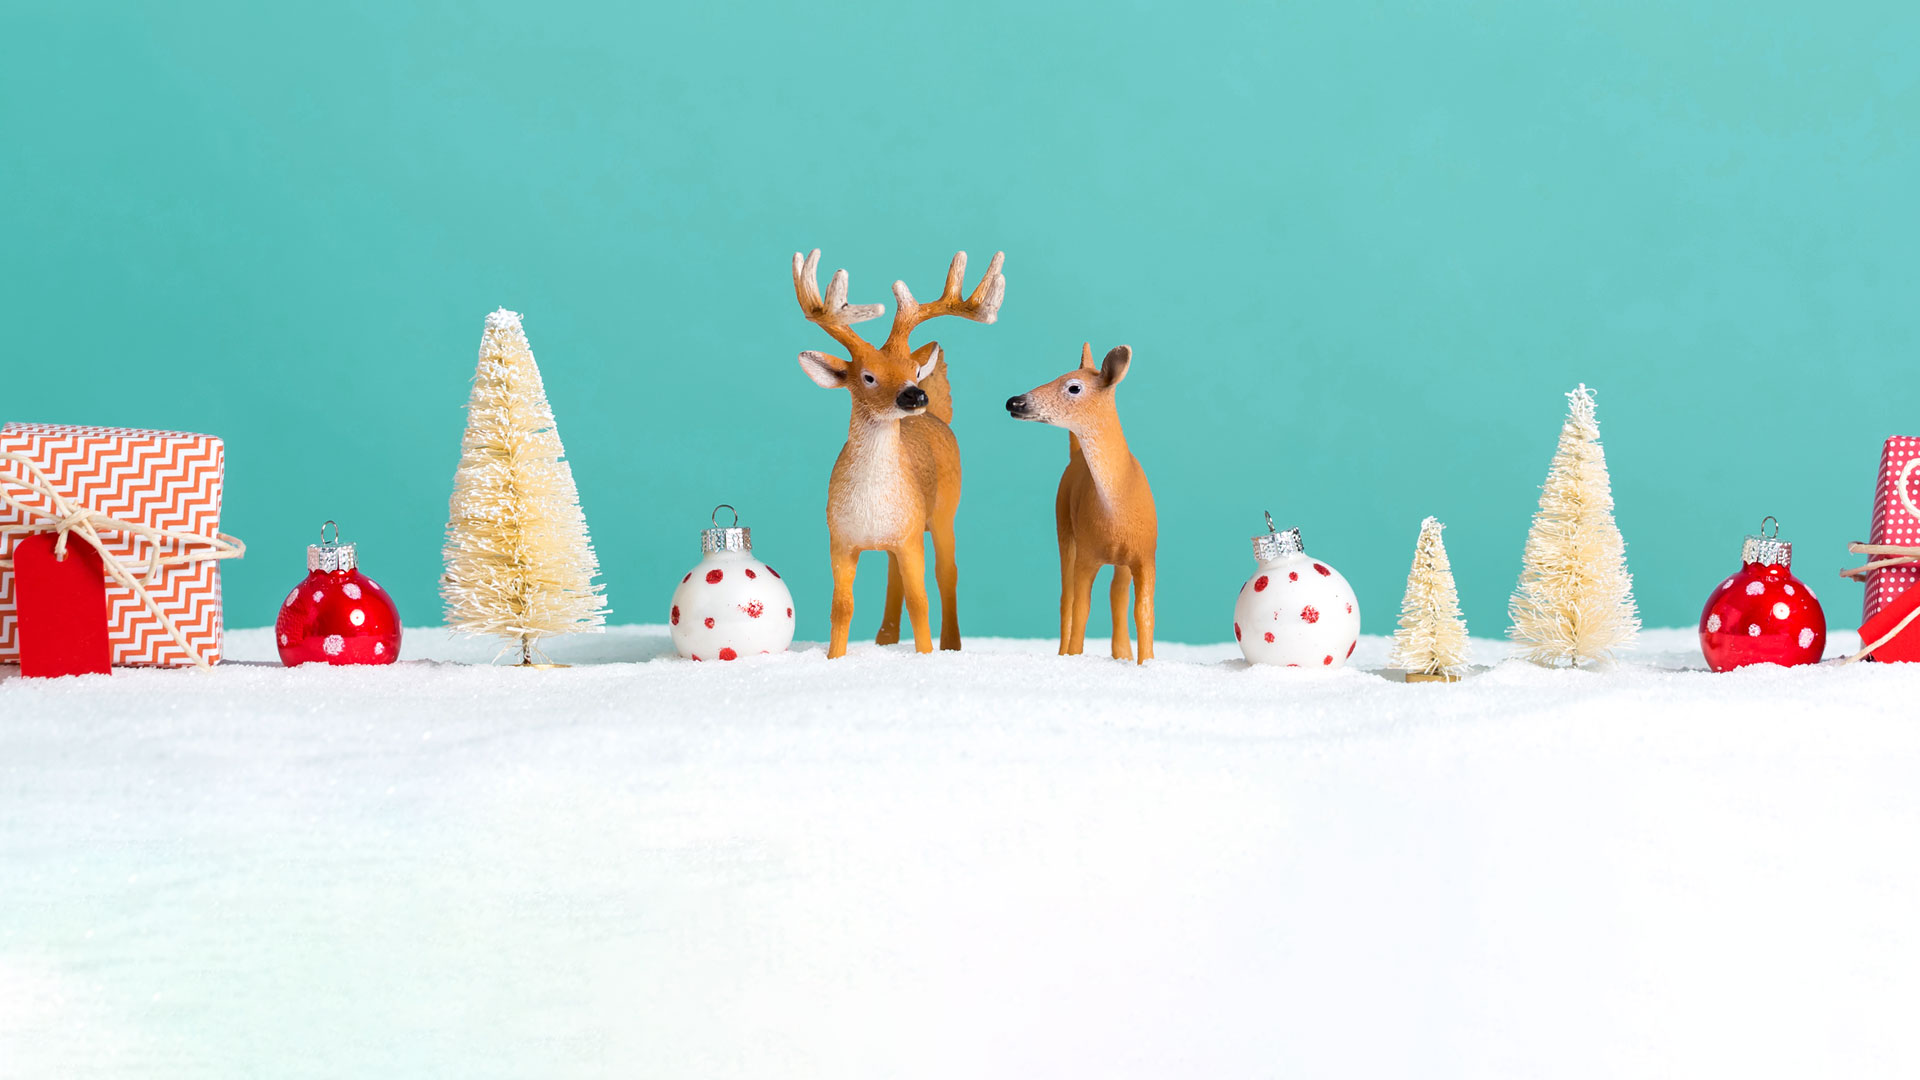 500px presents our second annual Questmas challenge